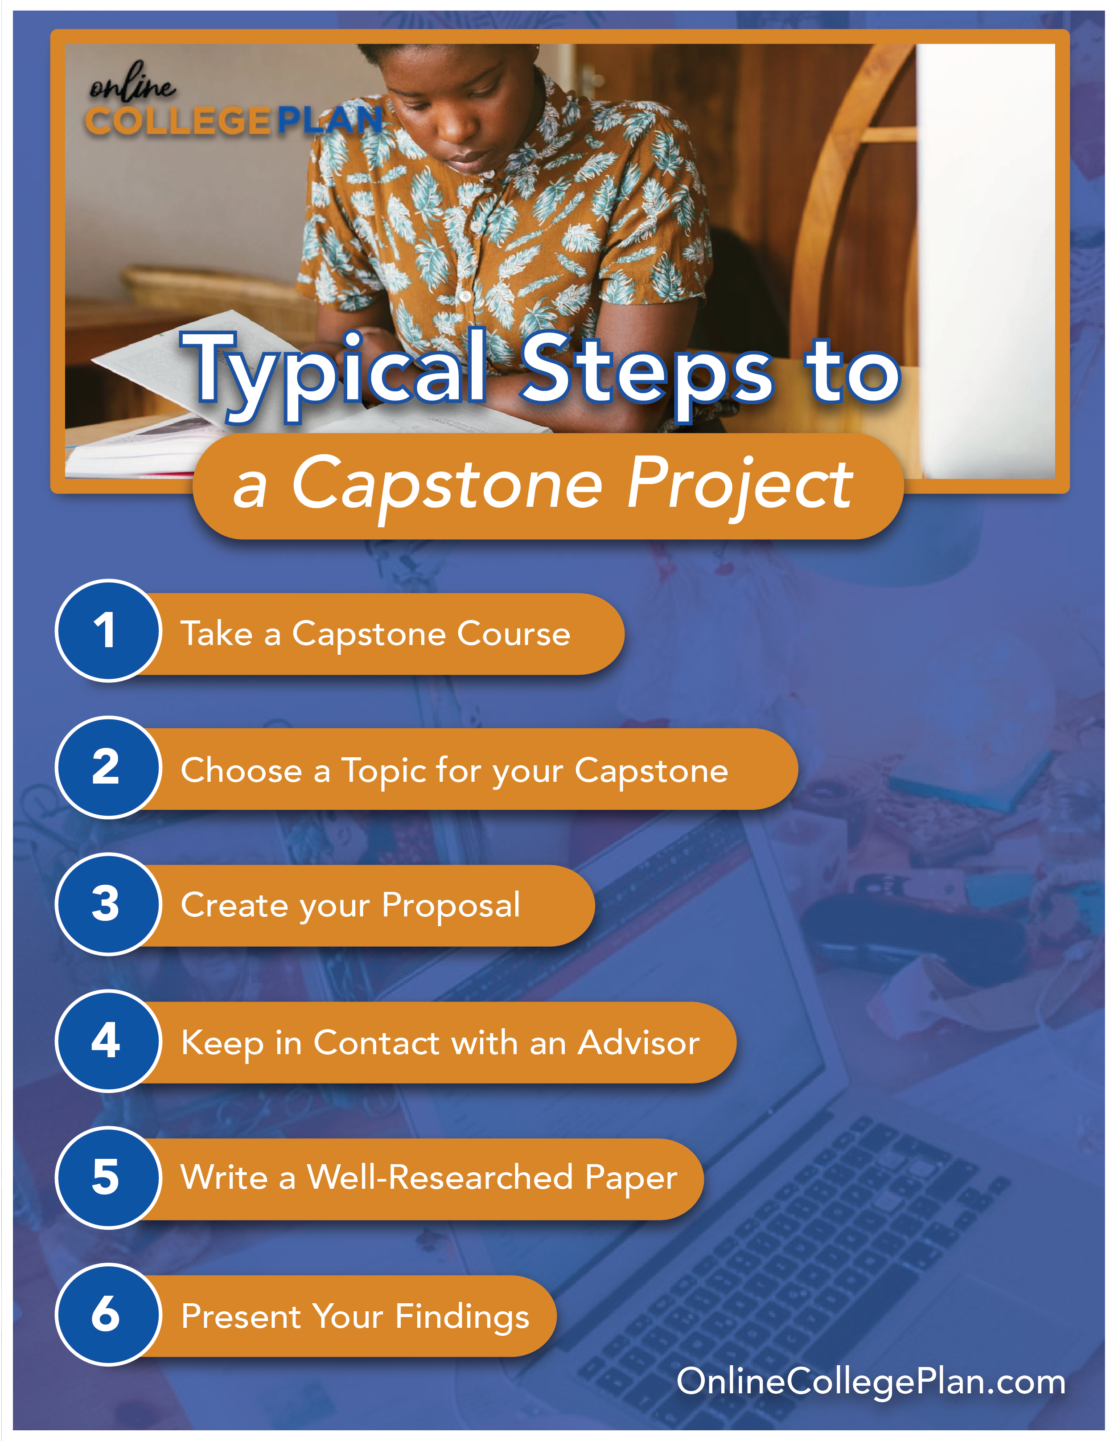 capstone project curriculum guide deped